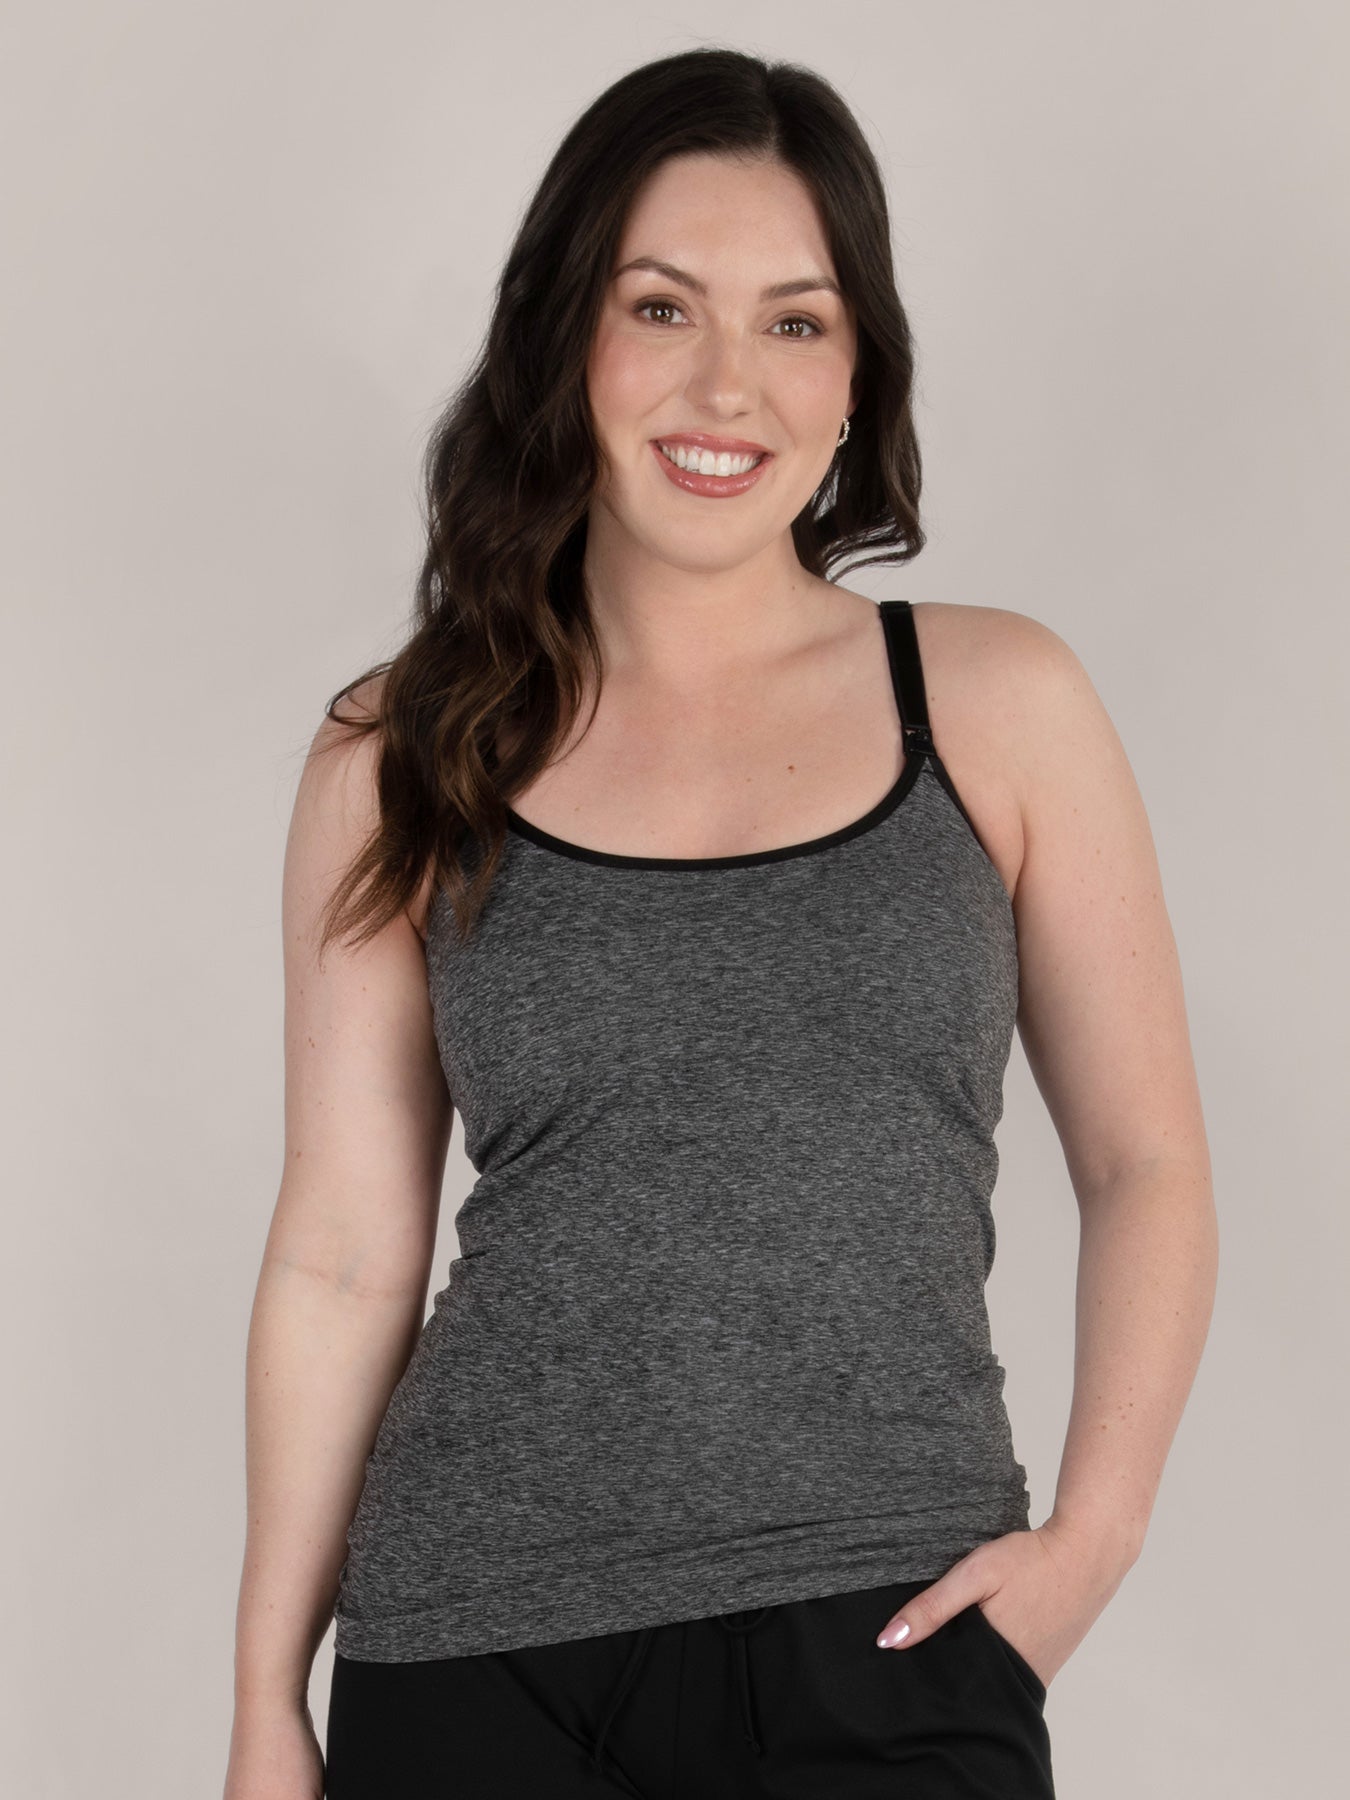 Bravado Basics Slimming Maternity And Nursing Cami Size Small - $24 New  With Tags - From Nicole